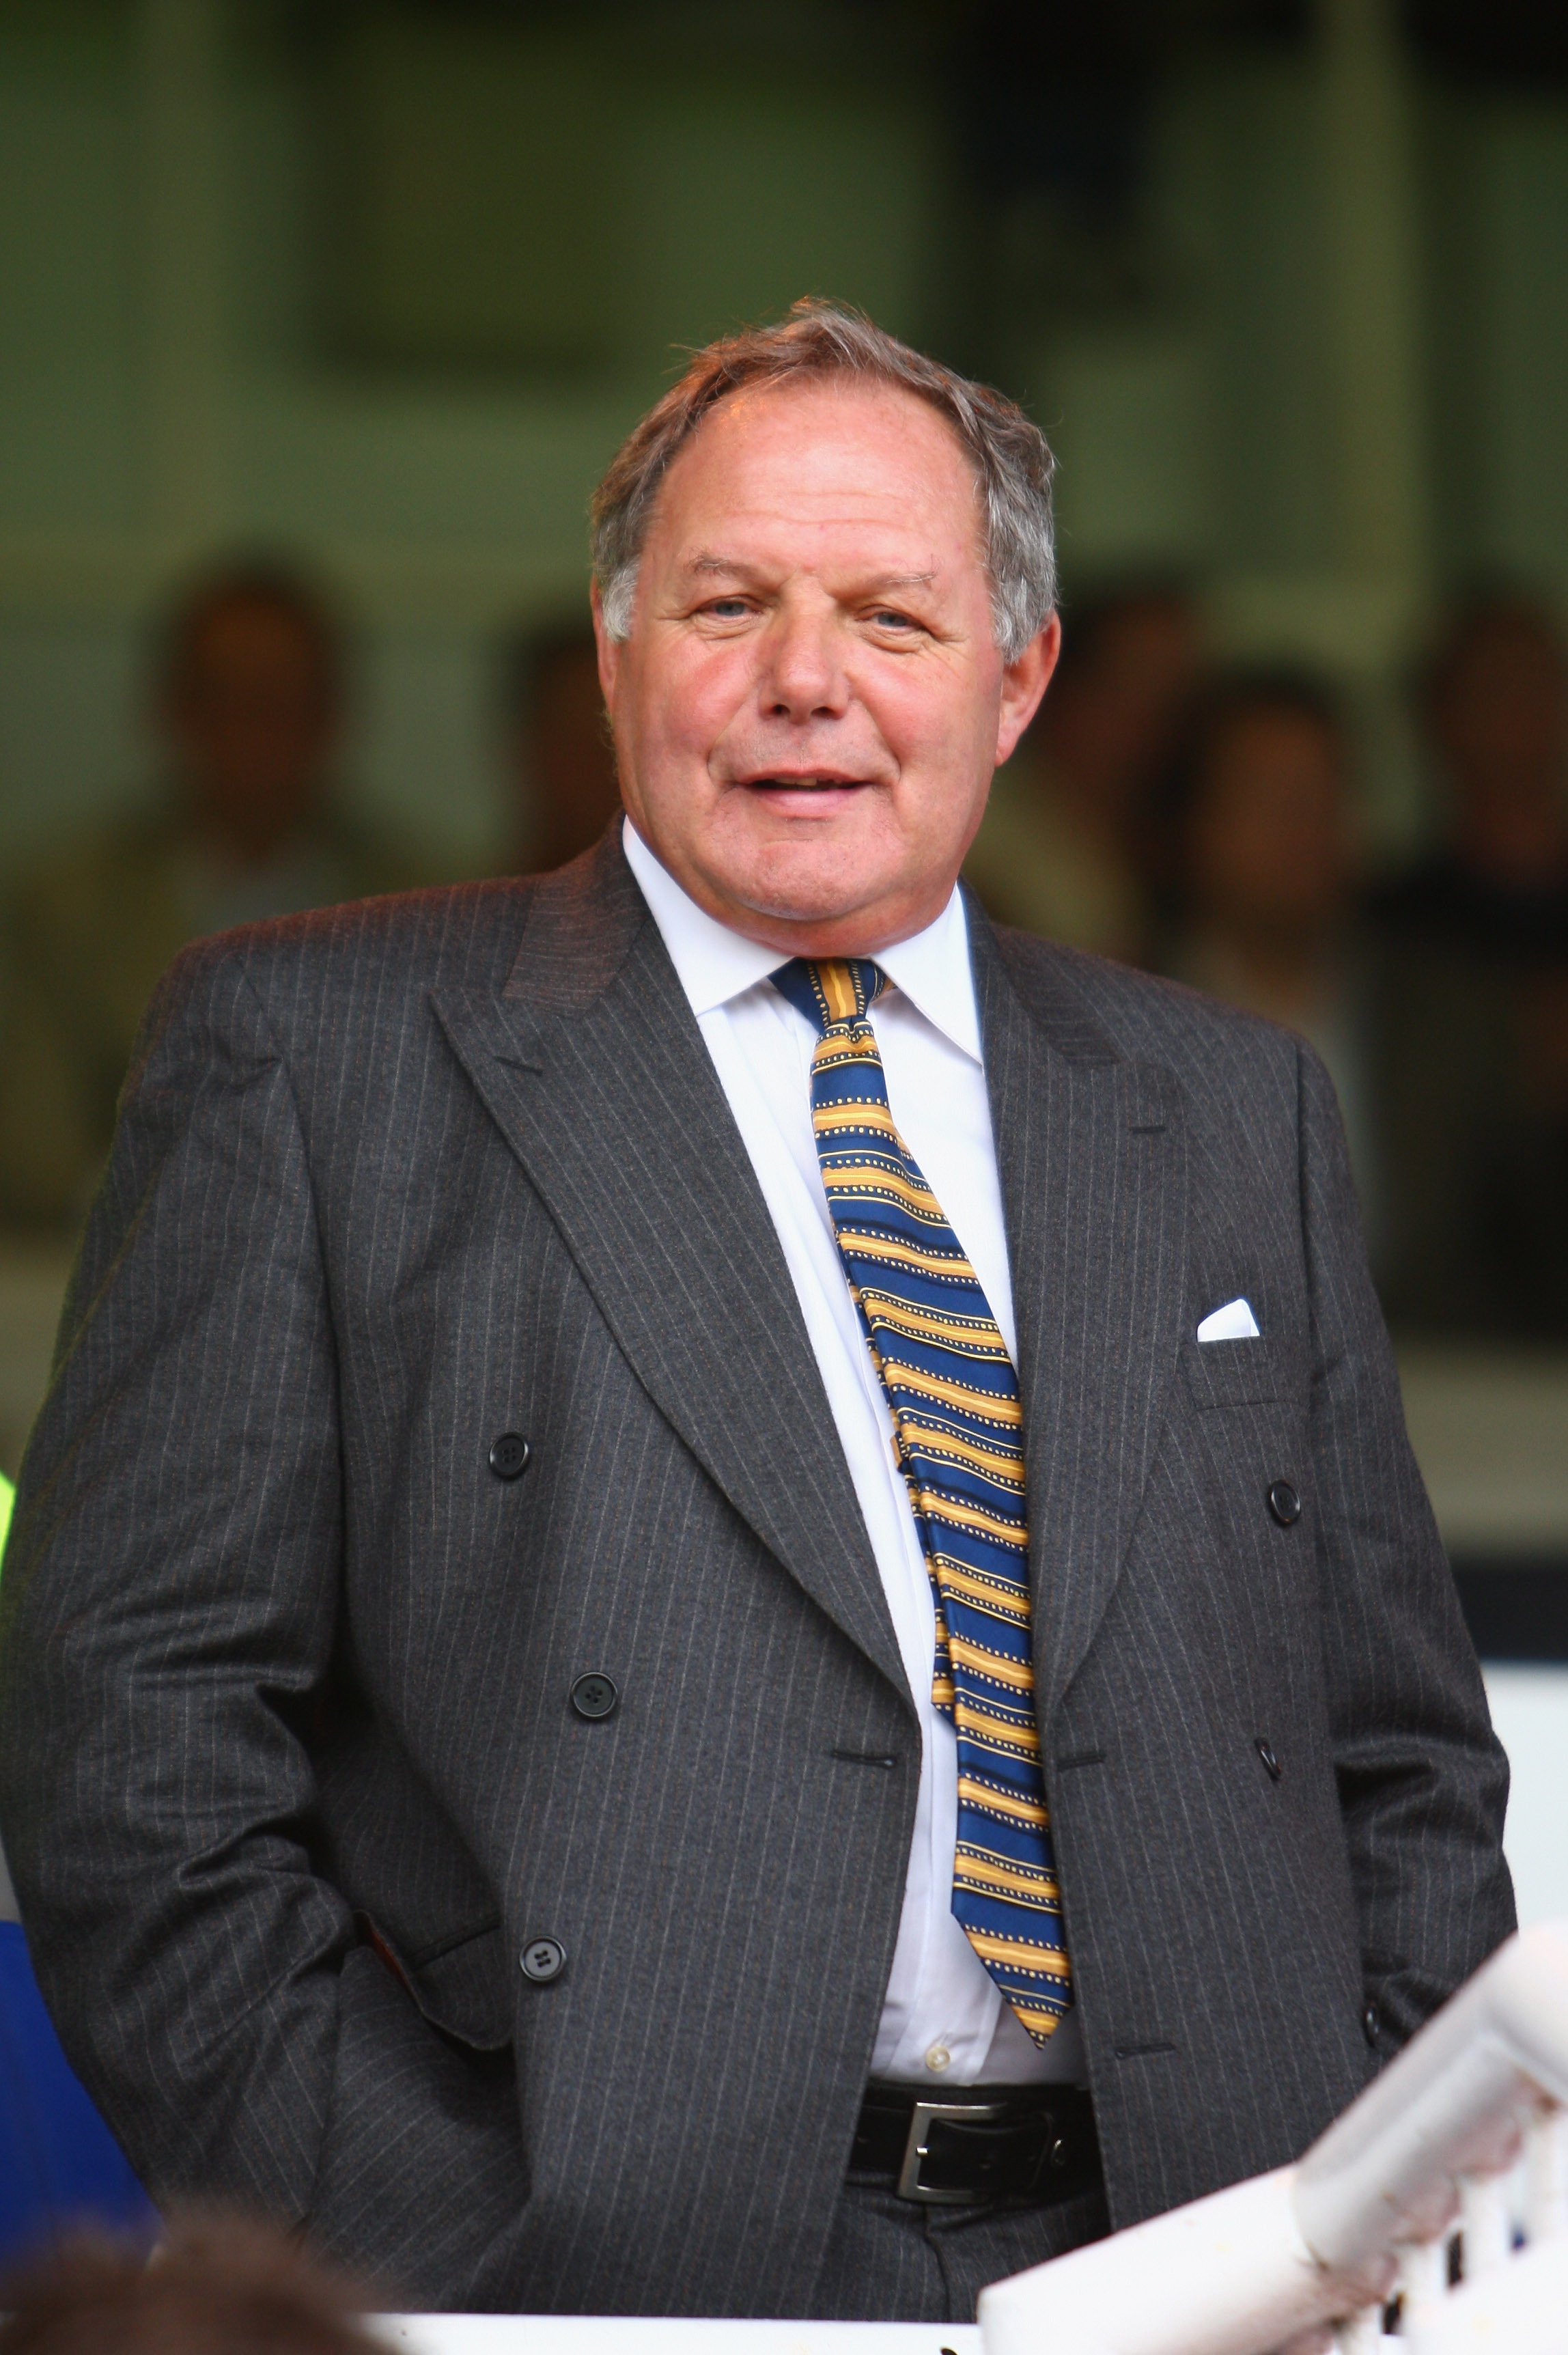 PETERBOROUGH, UNITED KINGDOM - JULY 13:  Barry Fry the managing director of Peterborough Utd  in action during the Pre-Season Friendly match between Peterborough United and Celtic at London Road on July 13, 2007, in Peterborough, England.  (Photo by Mark